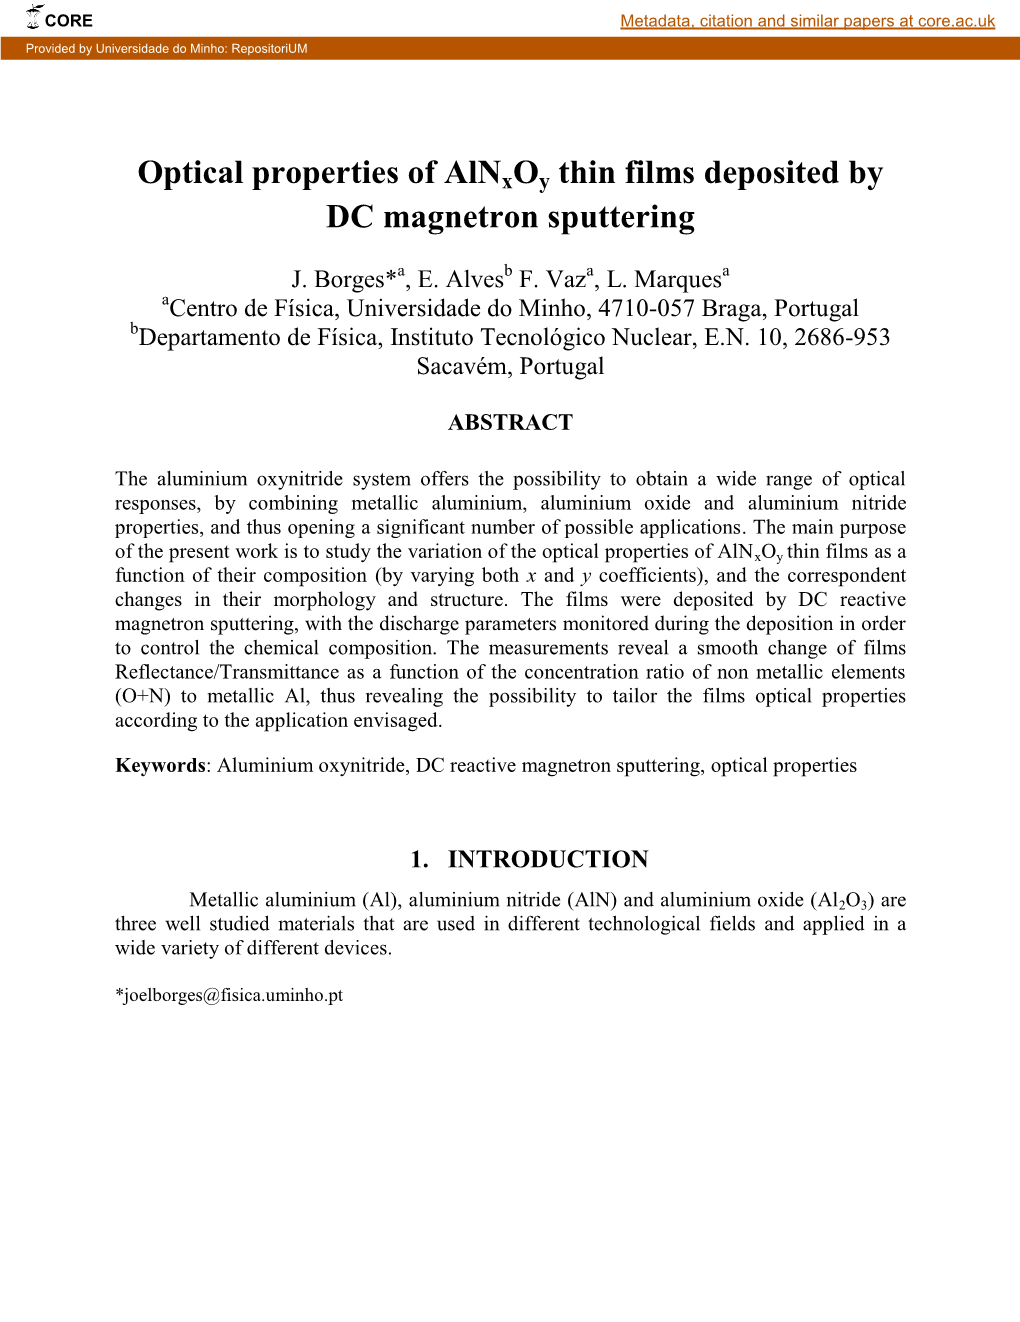 Optical Properties of Alnxoy Thin Films Deposited by DC Magnetron Sputtering